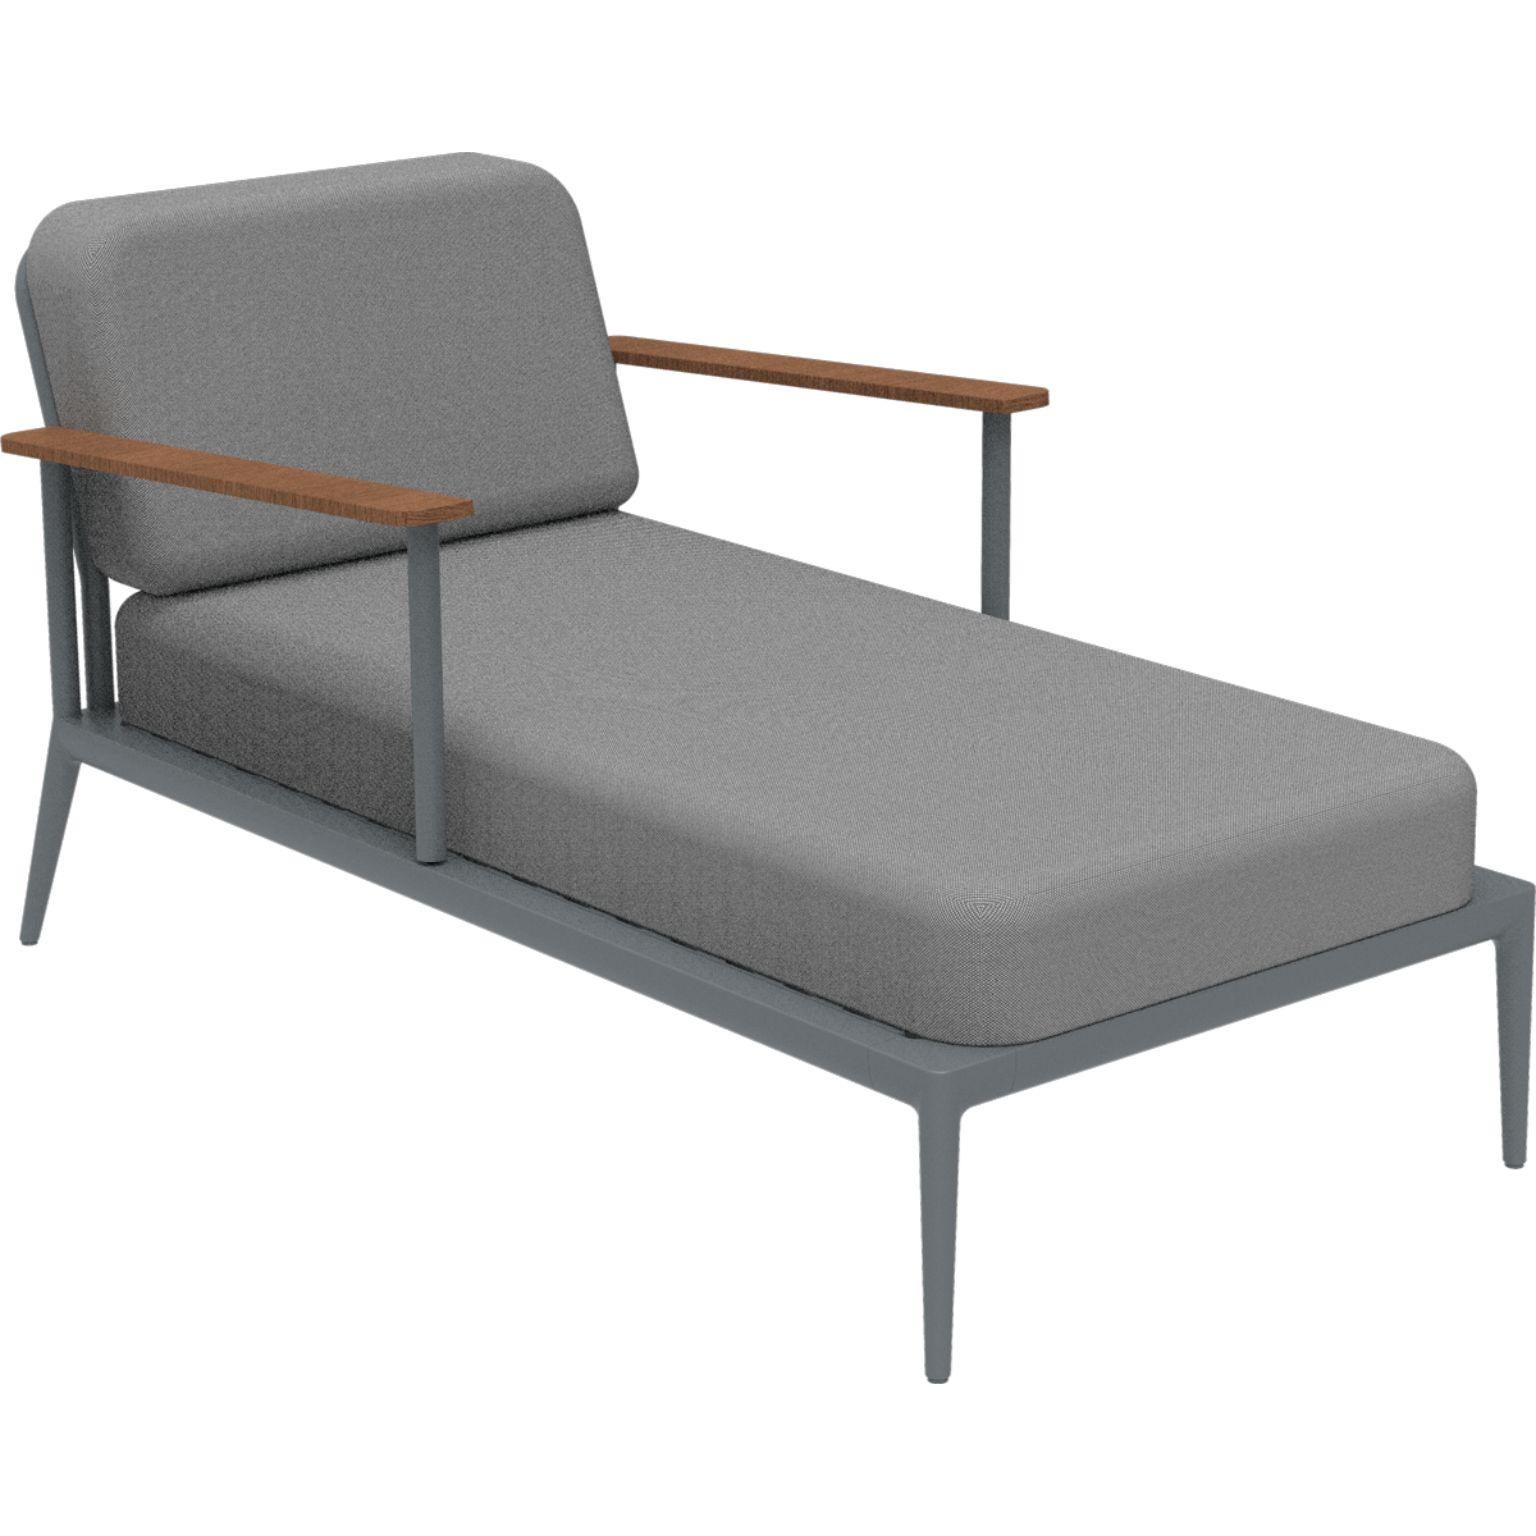 Nature Grey Divan by MOWEE
Dimensions: D155 x W83 x H81 cm (seat height 42 cm).
Material: Aluminum, upholstery and Iroko wood.
Weight: 30 kg.
Also available in different colors and finishes. Please contact us.

An unmistakable collection for